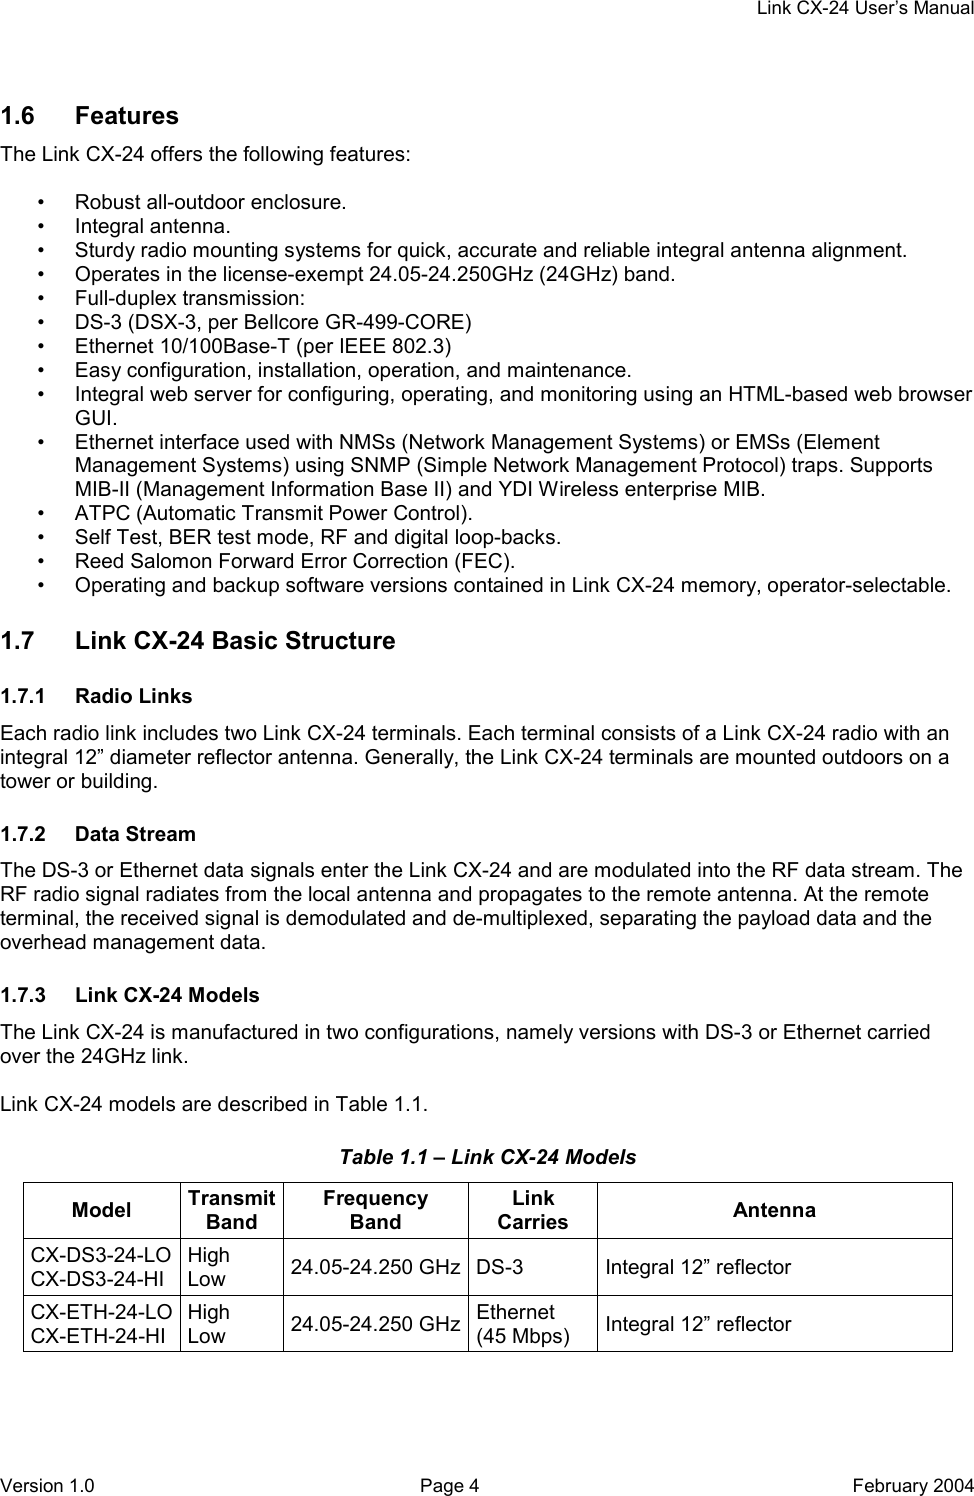     Link CX-24 User’s Manual Version 1.0  Page 4  February 2004 1.6 Features The Link CX-24 offers the following features:  •  Robust all-outdoor enclosure. • Integral antenna. •  Sturdy radio mounting systems for quick, accurate and reliable integral antenna alignment. •  Operates in the license-exempt 24.05-24.250GHz (24GHz) band. • Full-duplex transmission: •  DS-3 (DSX-3, per Bellcore GR-499-CORE) •  Ethernet 10/100Base-T (per IEEE 802.3) •  Easy configuration, installation, operation, and maintenance. •  Integral web server for configuring, operating, and monitoring using an HTML-based web browser GUI. •  Ethernet interface used with NMSs (Network Management Systems) or EMSs (Element Management Systems) using SNMP (Simple Network Management Protocol) traps. Supports MIB-II (Management Information Base II) and YDI Wireless enterprise MIB. •  ATPC (Automatic Transmit Power Control). •  Self Test, BER test mode, RF and digital loop-backs. •  Reed Salomon Forward Error Correction (FEC). •  Operating and backup software versions contained in Link CX-24 memory, operator-selectable. 1.7  Link CX-24 Basic Structure 1.7.1 Radio Links Each radio link includes two Link CX-24 terminals. Each terminal consists of a Link CX-24 radio with an integral 12” diameter reflector antenna. Generally, the Link CX-24 terminals are mounted outdoors on a tower or building. 1.7.2 Data Stream The DS-3 or Ethernet data signals enter the Link CX-24 and are modulated into the RF data stream. The RF radio signal radiates from the local antenna and propagates to the remote antenna. At the remote terminal, the received signal is demodulated and de-multiplexed, separating the payload data and the overhead management data. 1.7.3  Link CX-24 Models The Link CX-24 is manufactured in two configurations, namely versions with DS-3 or Ethernet carried over the 24GHz link.  Link CX-24 models are described in Table 1.1. Table 1.1 – Link CX-24 Models Model  Transmit Band Frequency Band Link Carries  Antenna CX-DS3-24-LO CX-DS3-24-HI High Low  24.05-24.250 GHz DS-3  Integral 12” reflector CX-ETH-24-LO CX-ETH-24-HI High Low  24.05-24.250 GHz Ethernet (45 Mbps)  Integral 12” reflector  